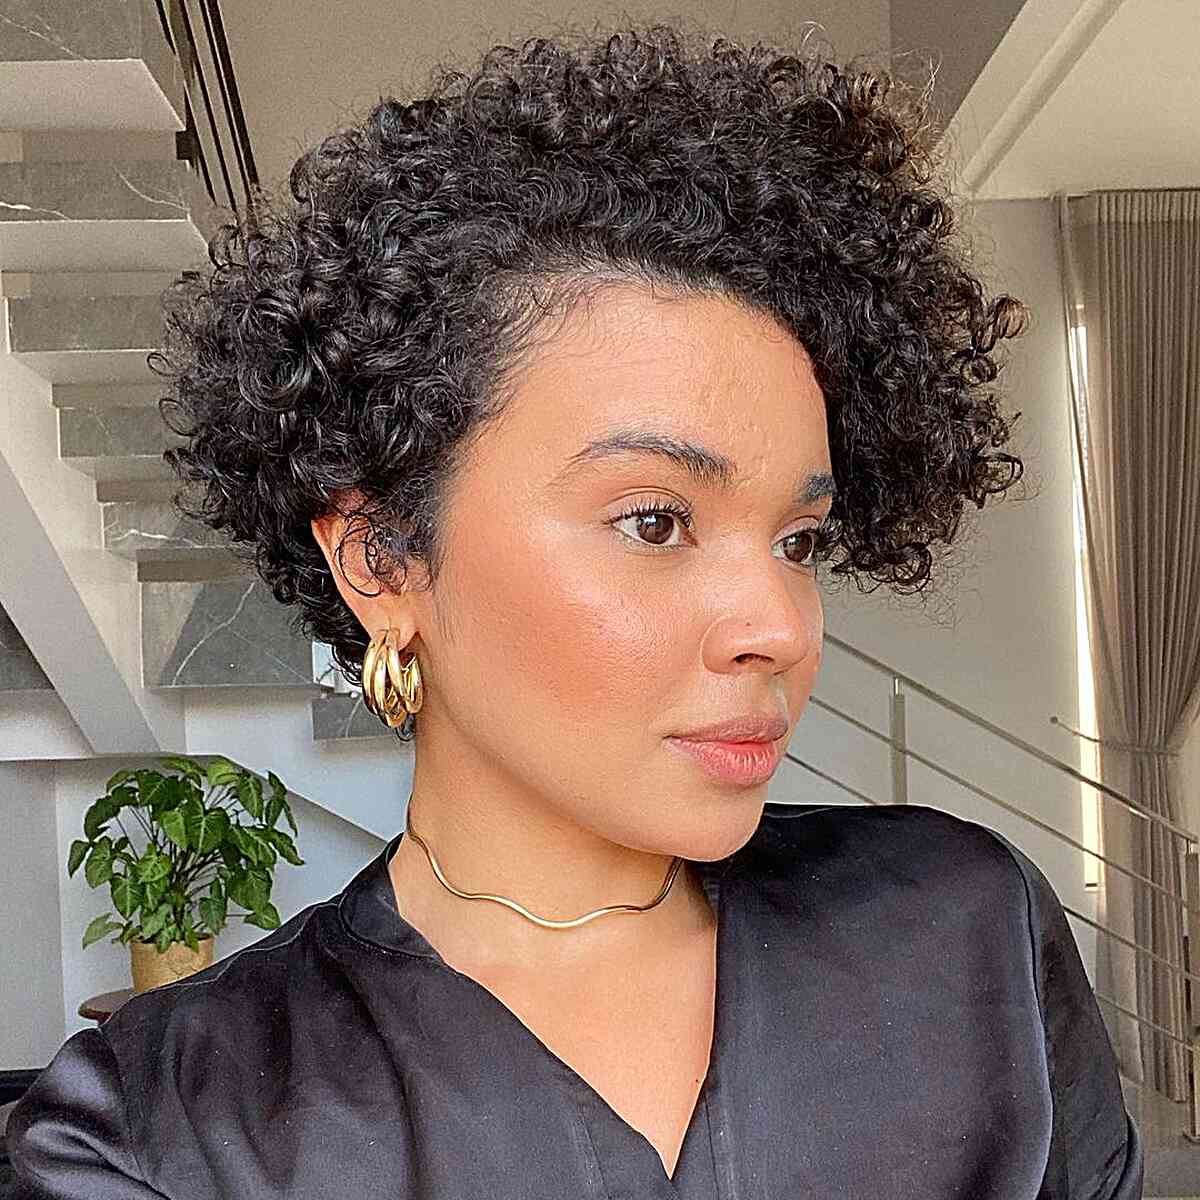 A woman with a square-shaped face wearing a dark curly pixie haircut, with rounded top curls that soften her jawline